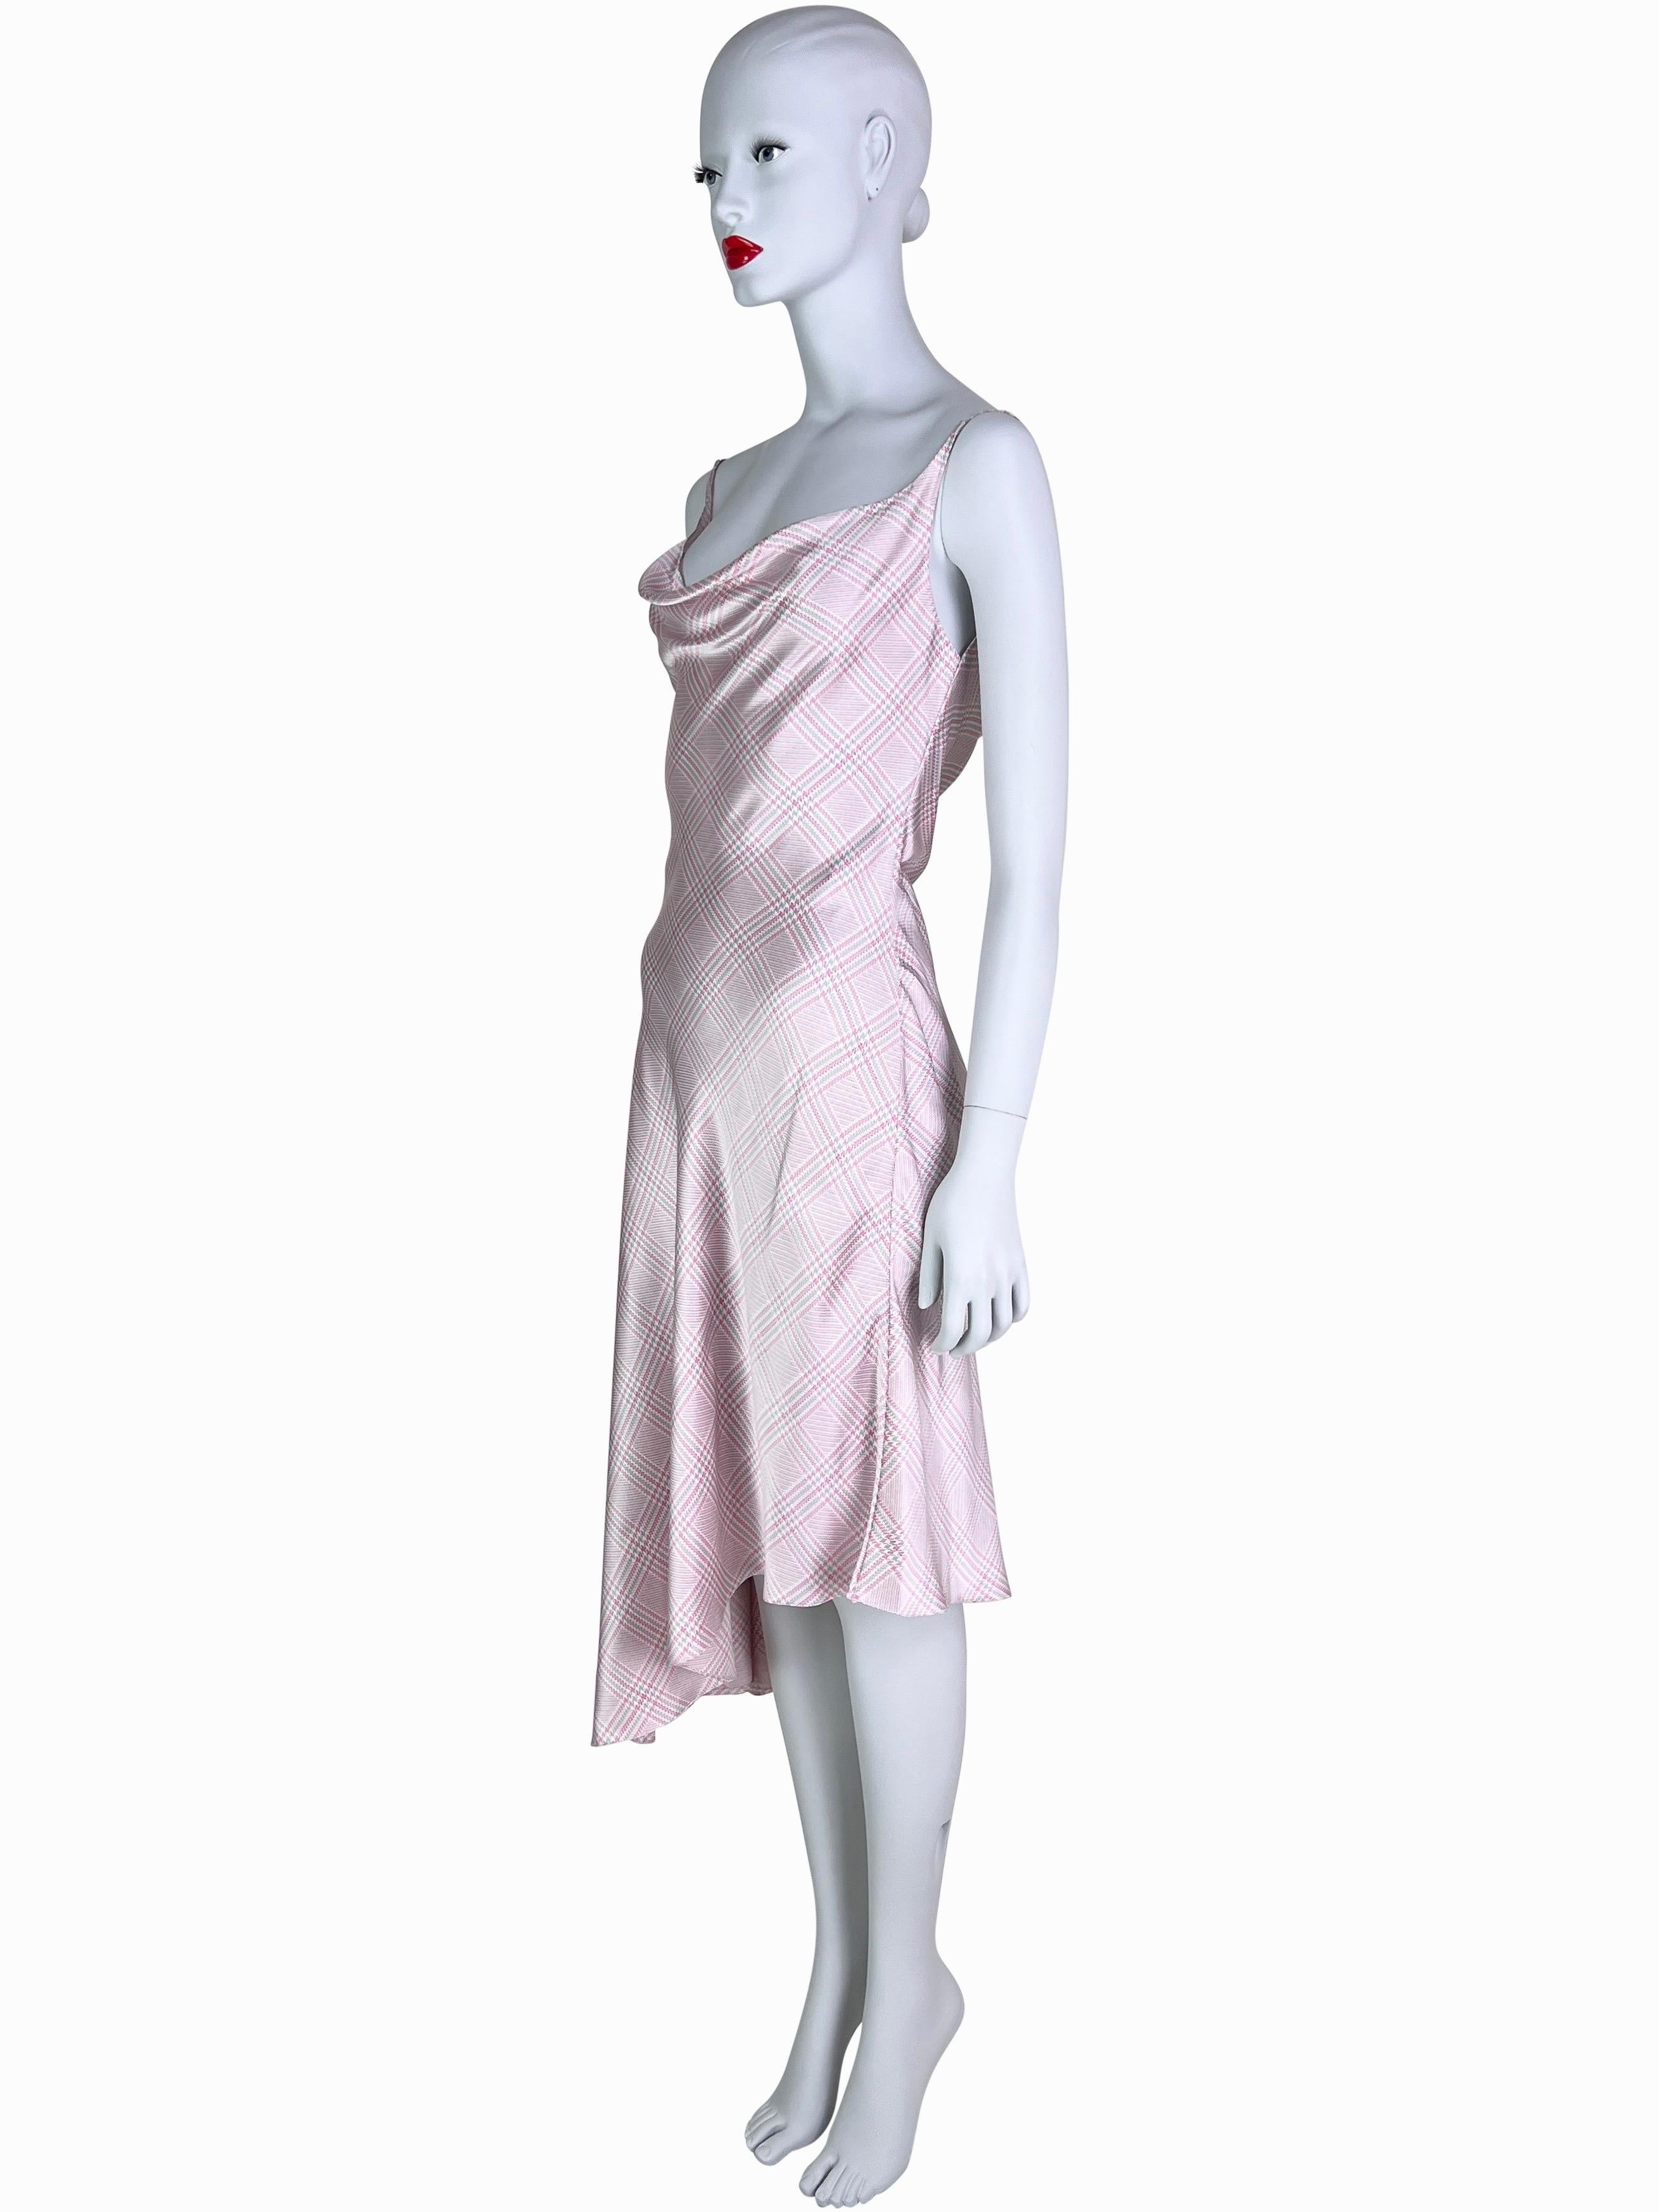 Givenchy by Alexander McQueen Spring 1998 Silk Dress In Excellent Condition For Sale In Prague, CZ